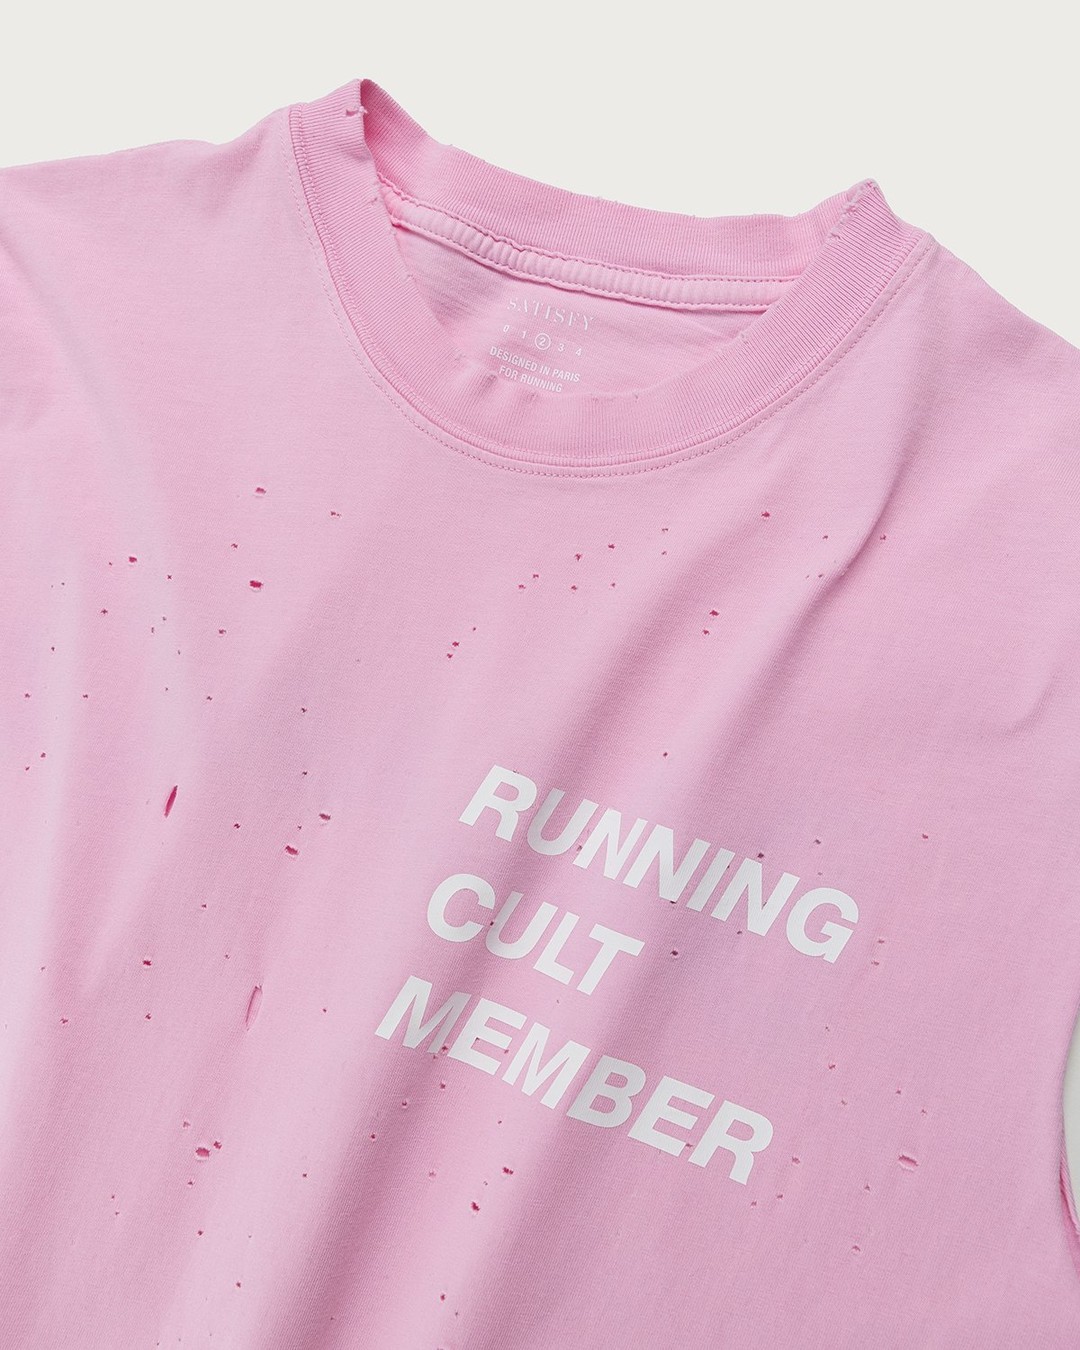 Satisfy x Highsnobiety – HS Sports Balance Muscle Tee Pink - Tops - Pink - Image 4